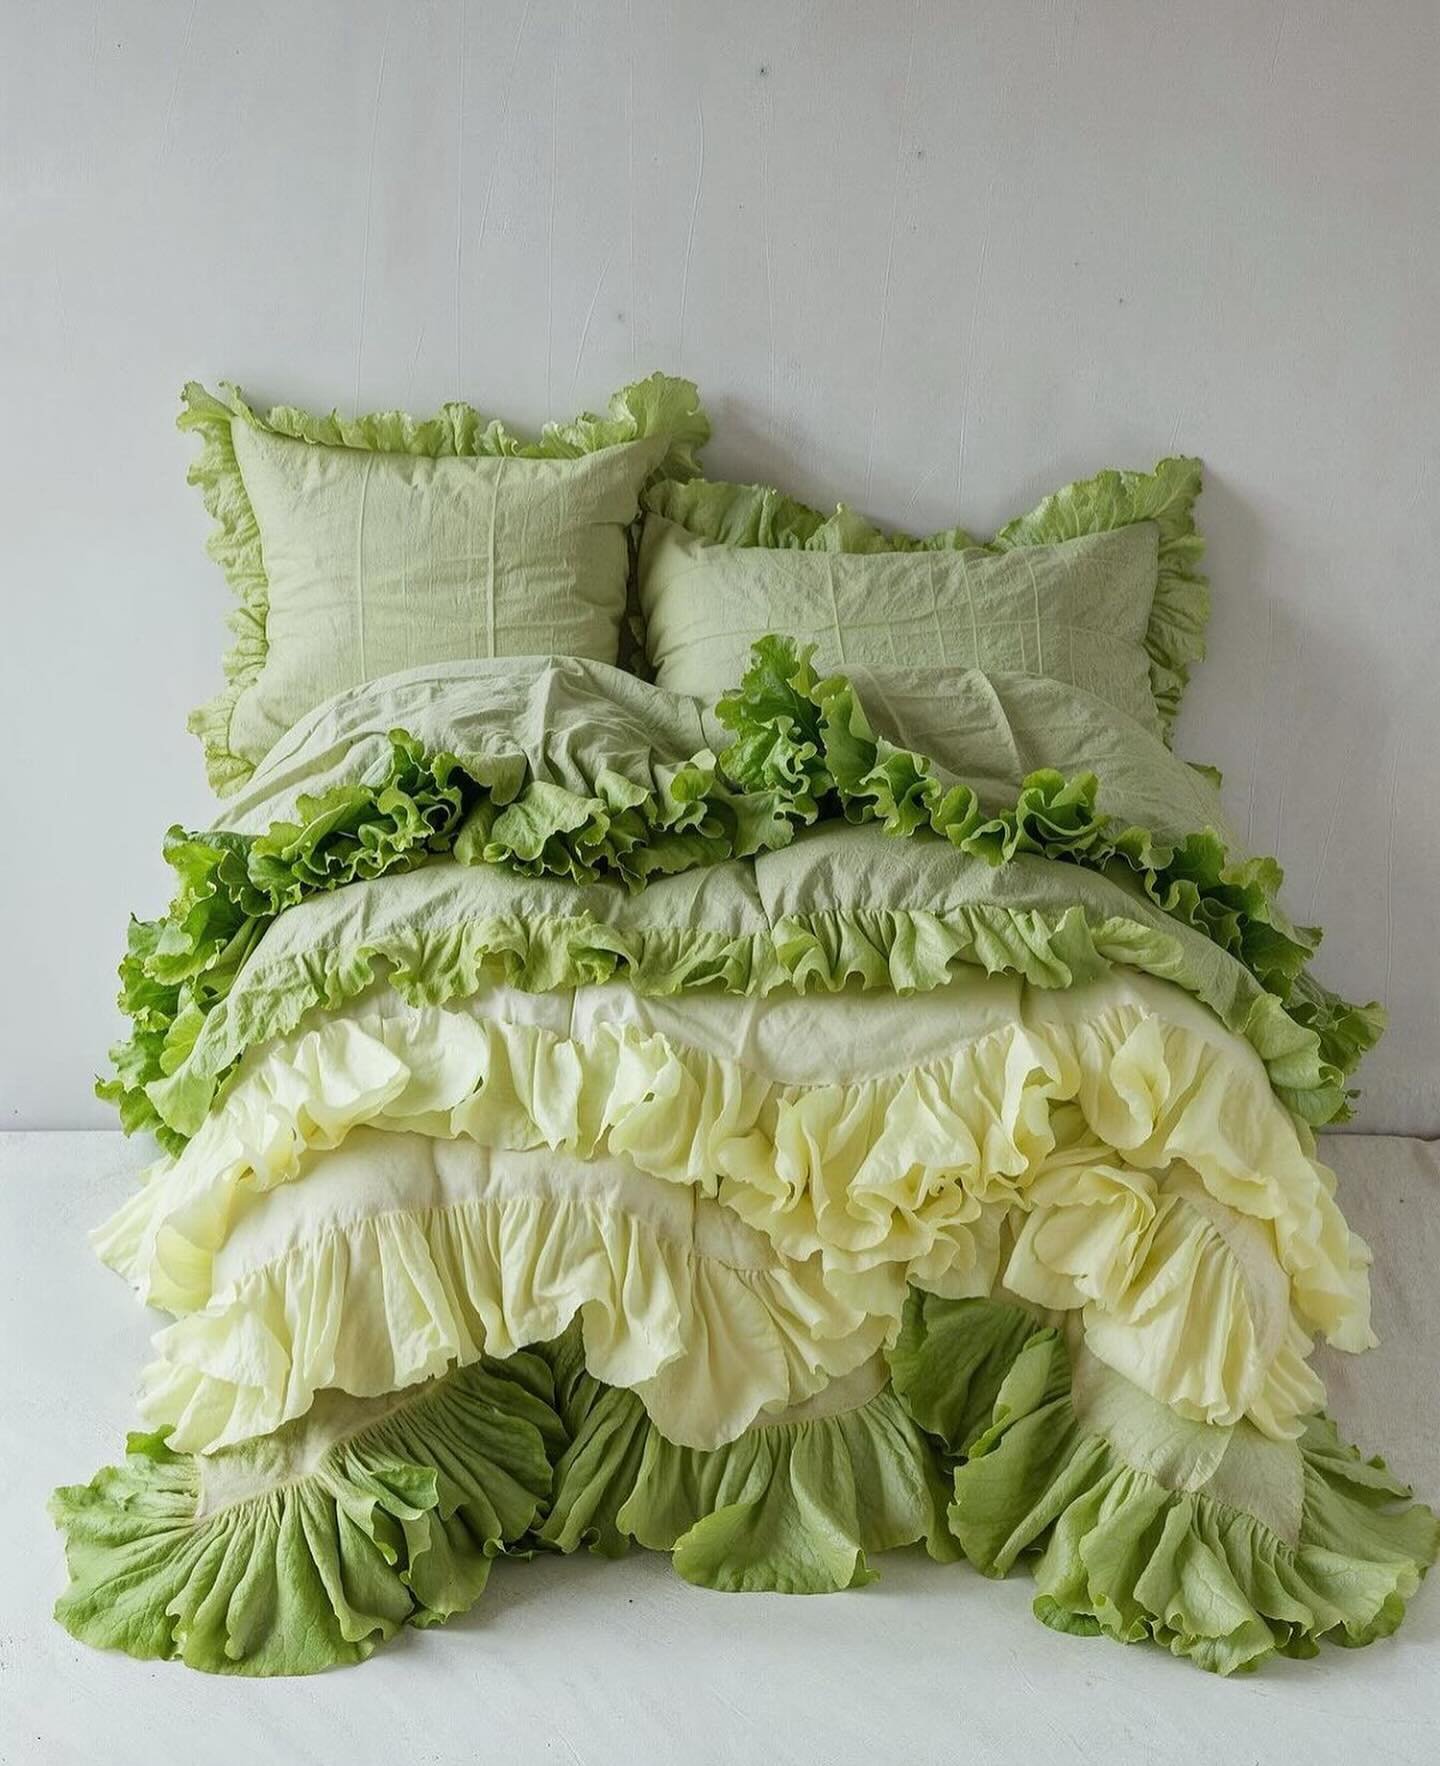 A Bed of Lettuce 🥬 🛏️ #sunday @pauloctavious